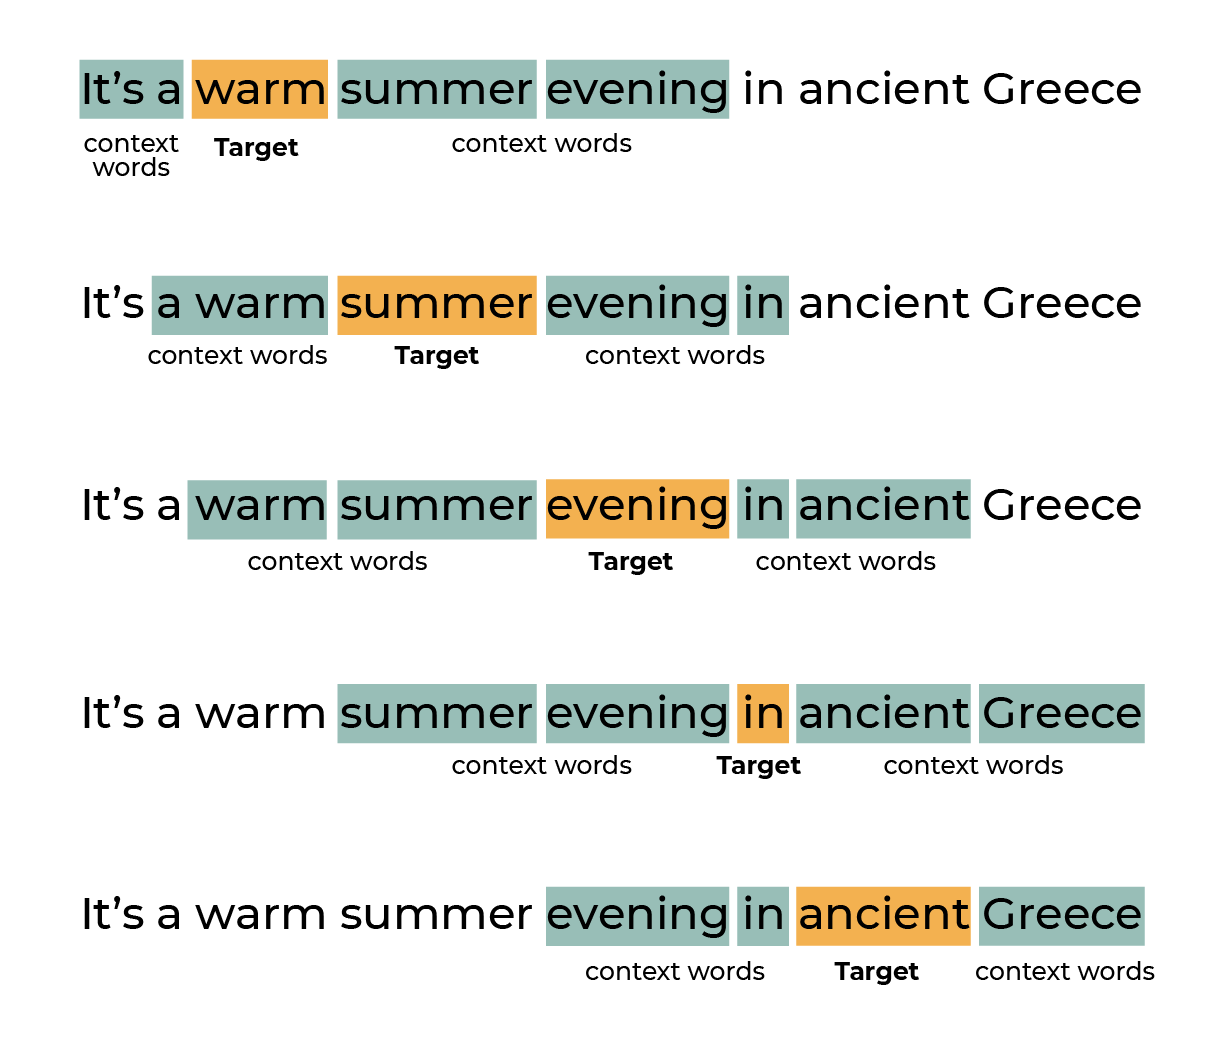 Sliding window of 5 words over the sentence “It's a warm summer evening in ancient Greece”